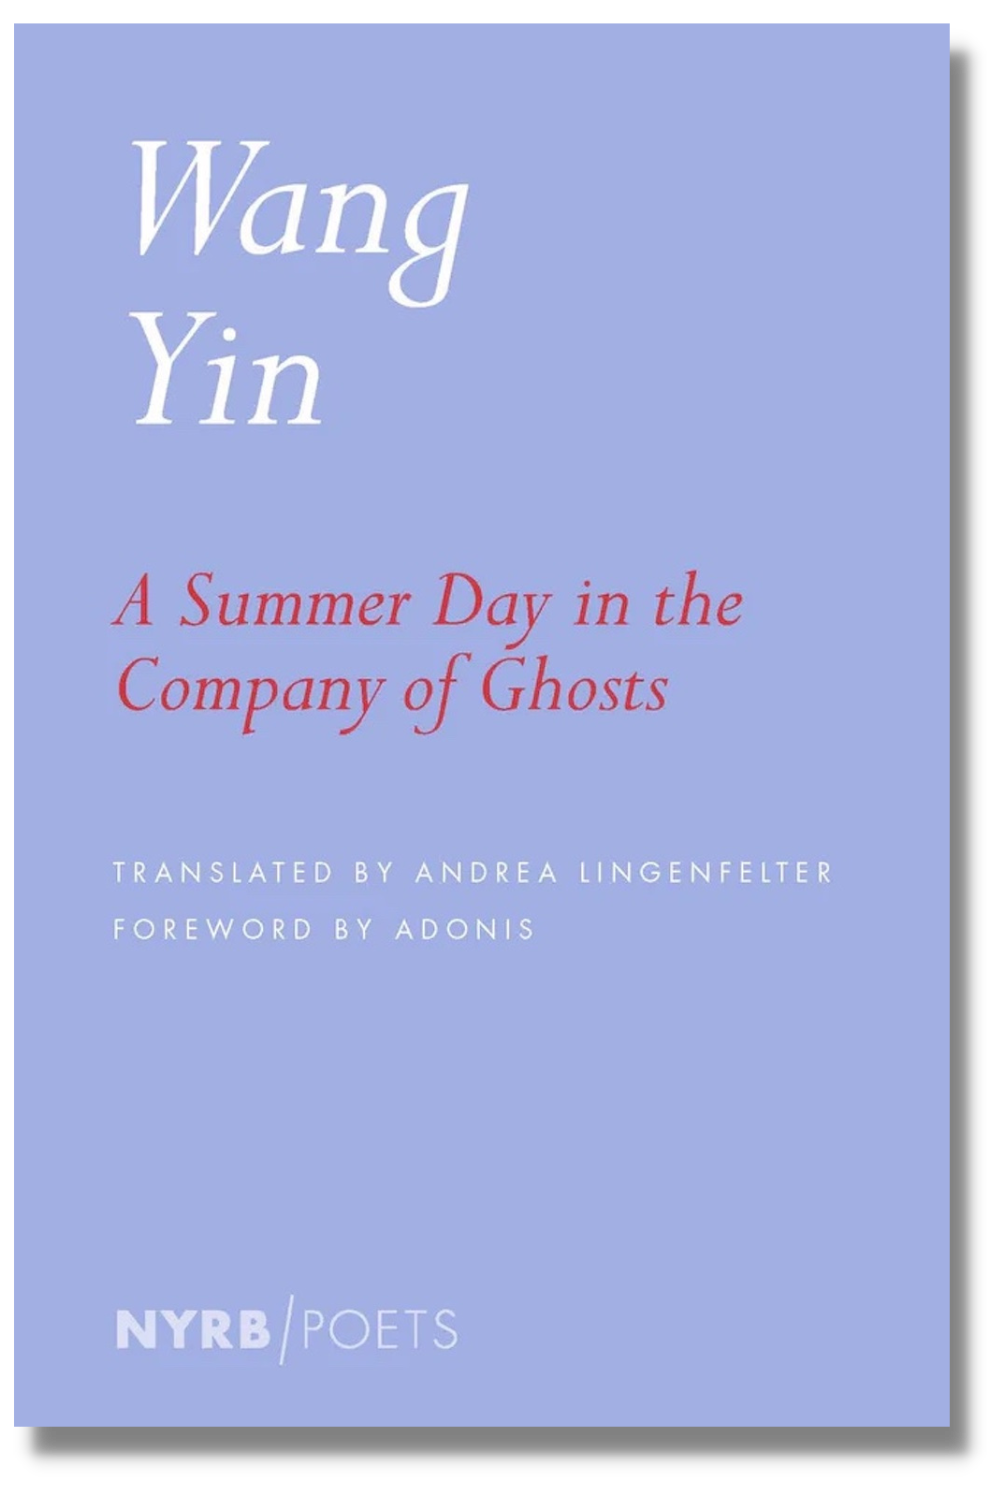 The cover of "A Summer Day in the Company of Ghosts"